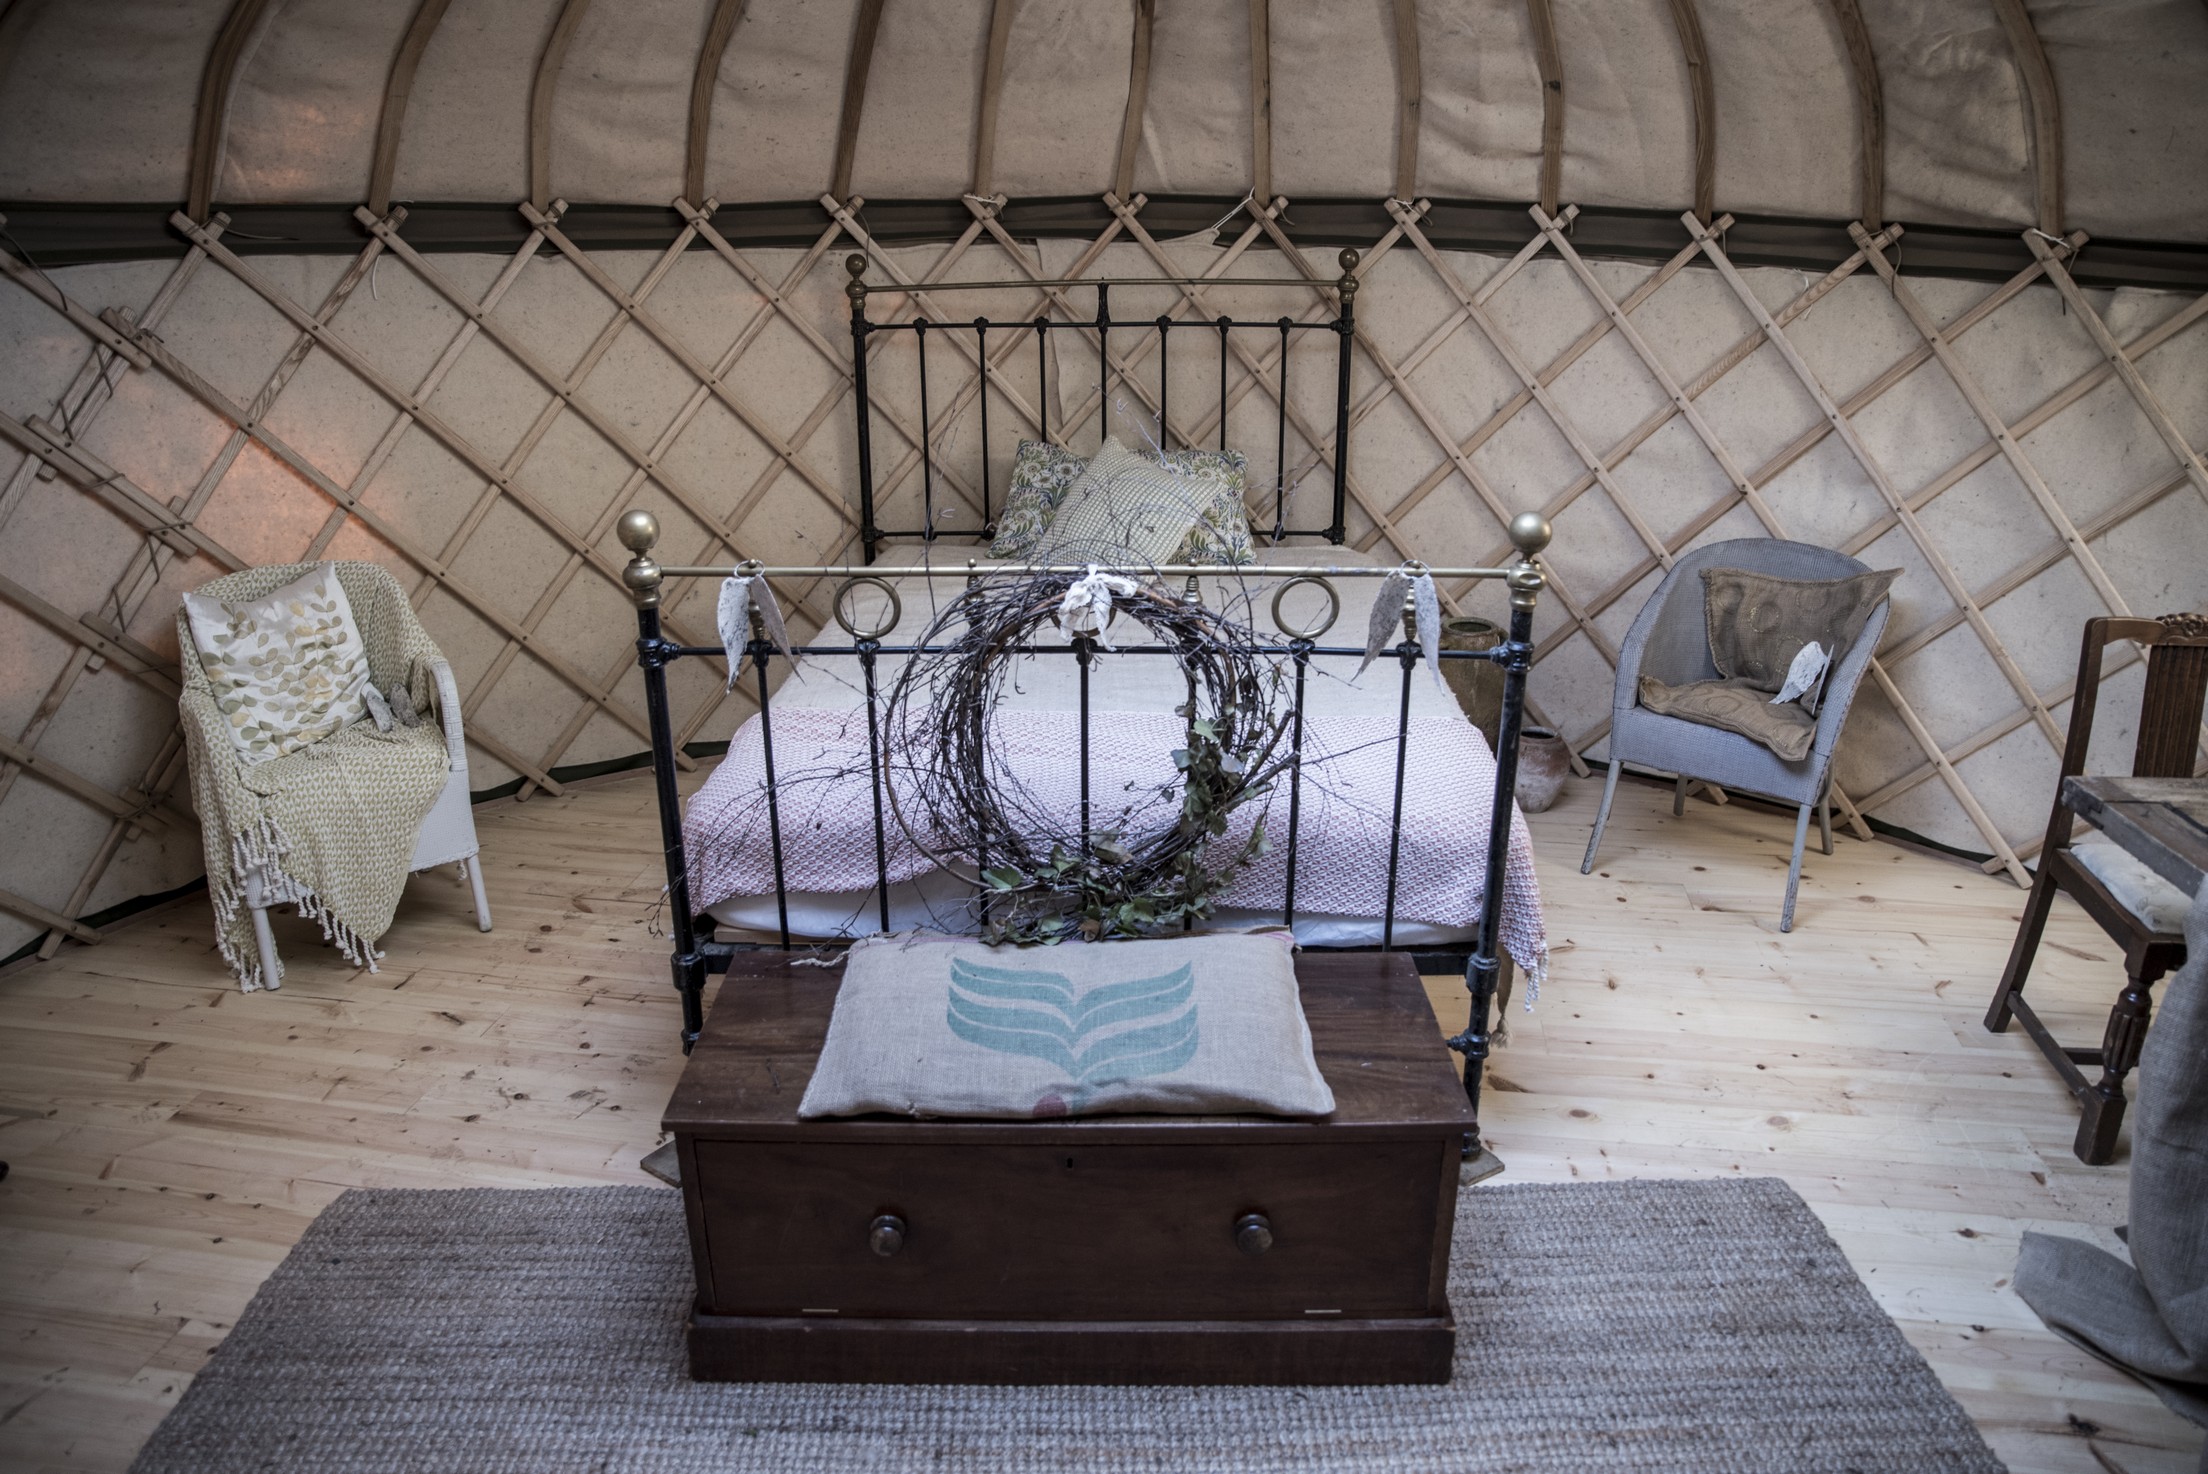 Emma The Barn at Lees Farm Yurt. Sharing independent shops online at Love Our Shops UK shopping directory.